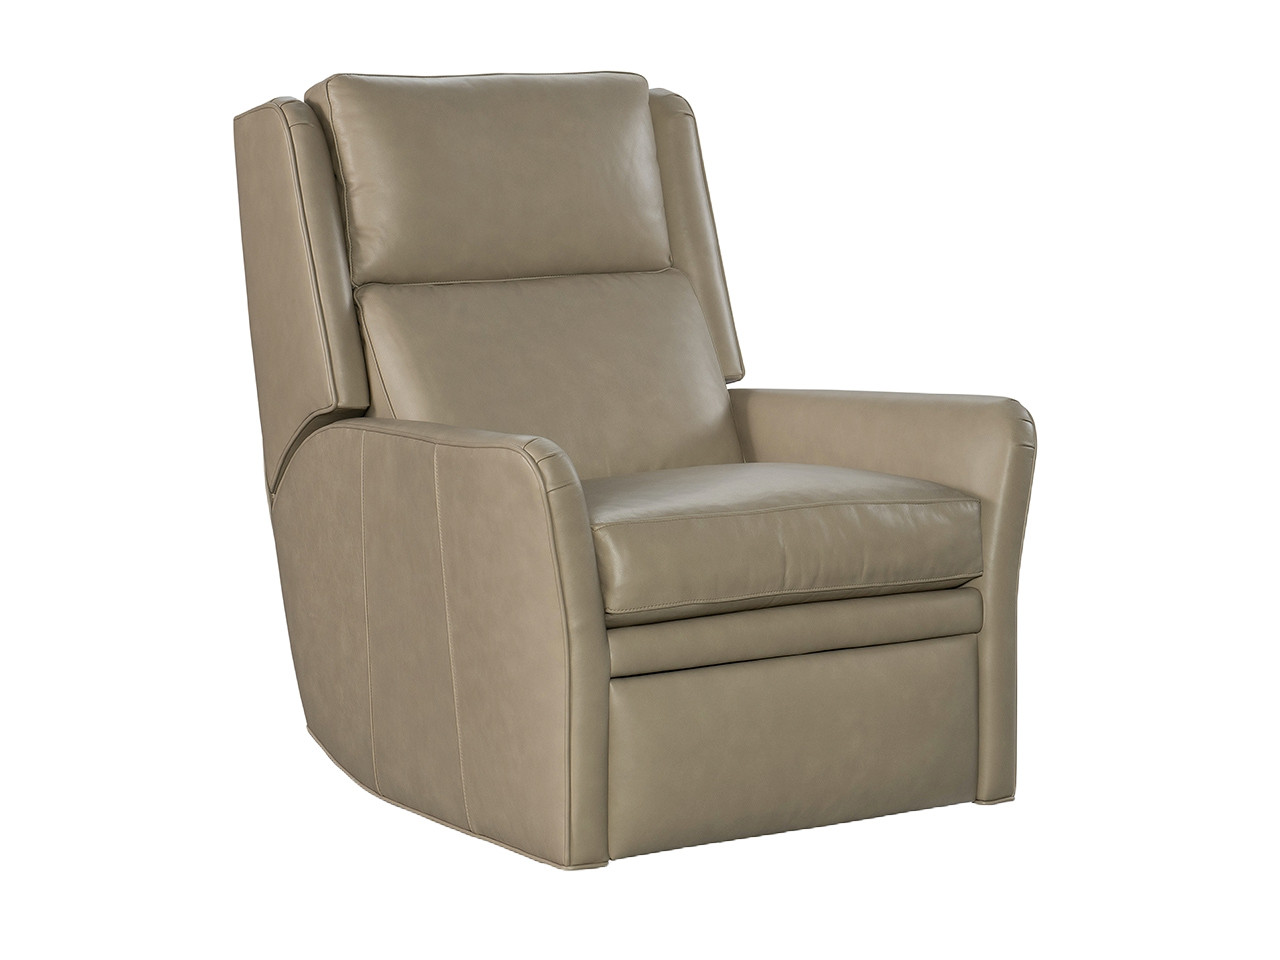 BY Cloud Zero Gravity Recliner with Power Headrest - Country Willow